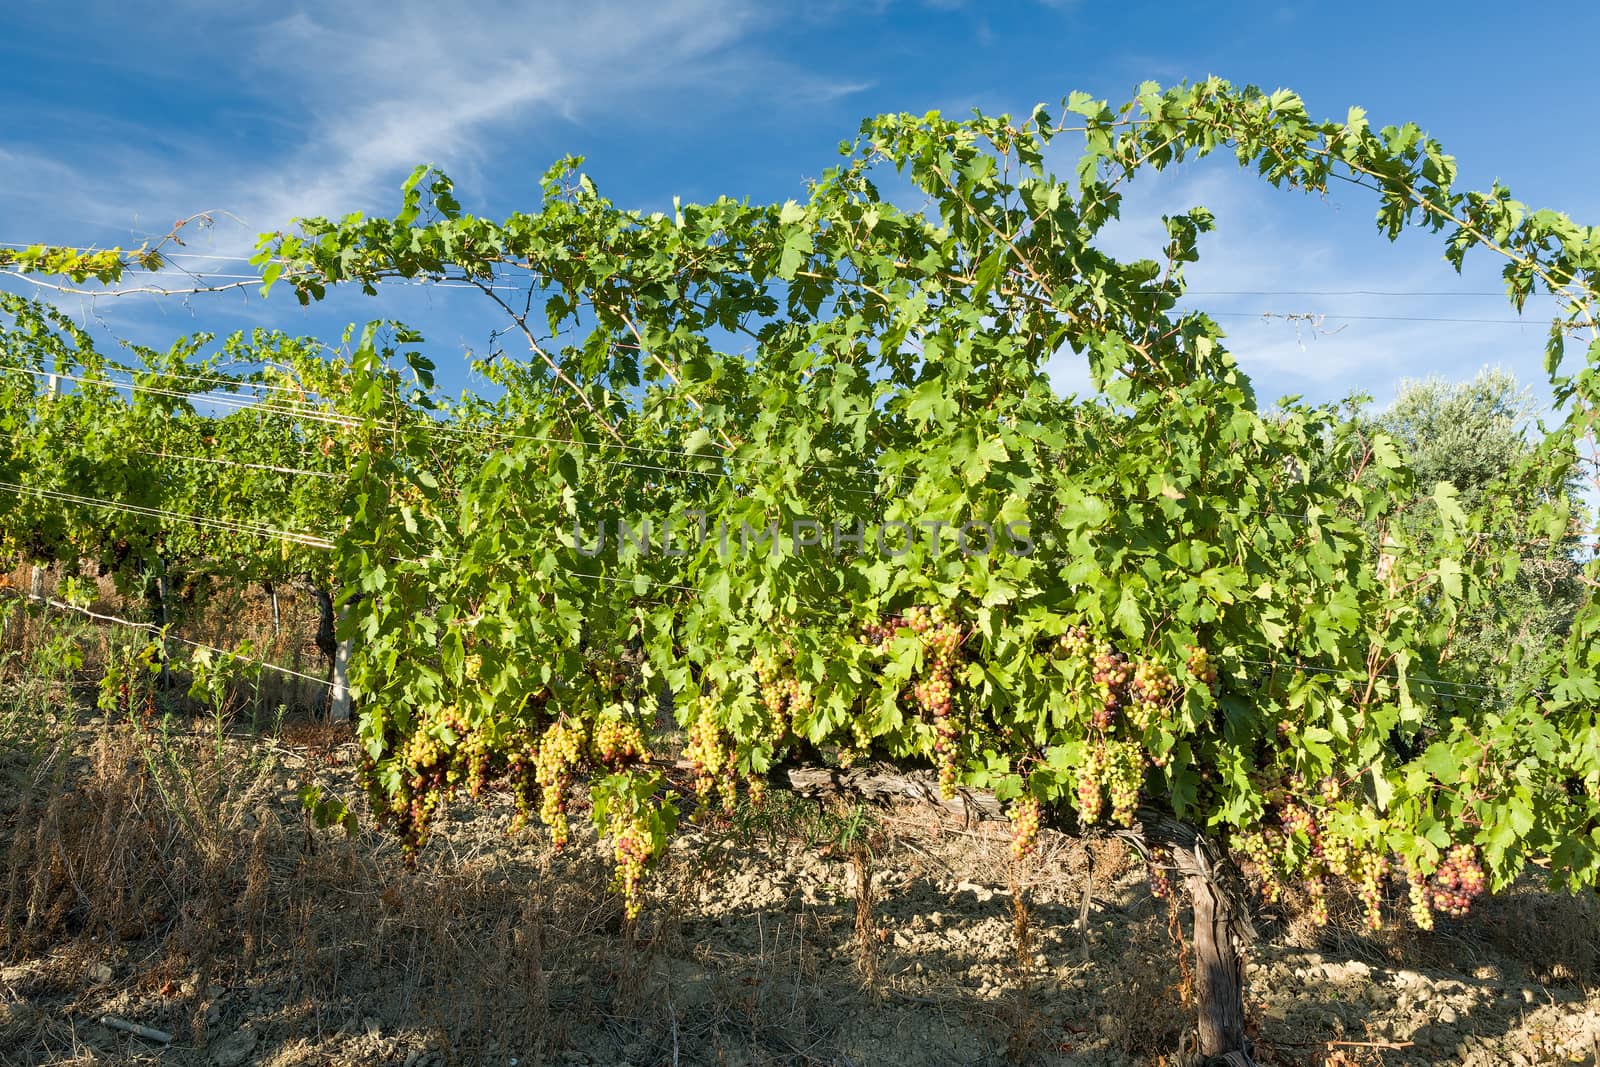 Colored grapes in the vineyard in a sunny day against a blue sky